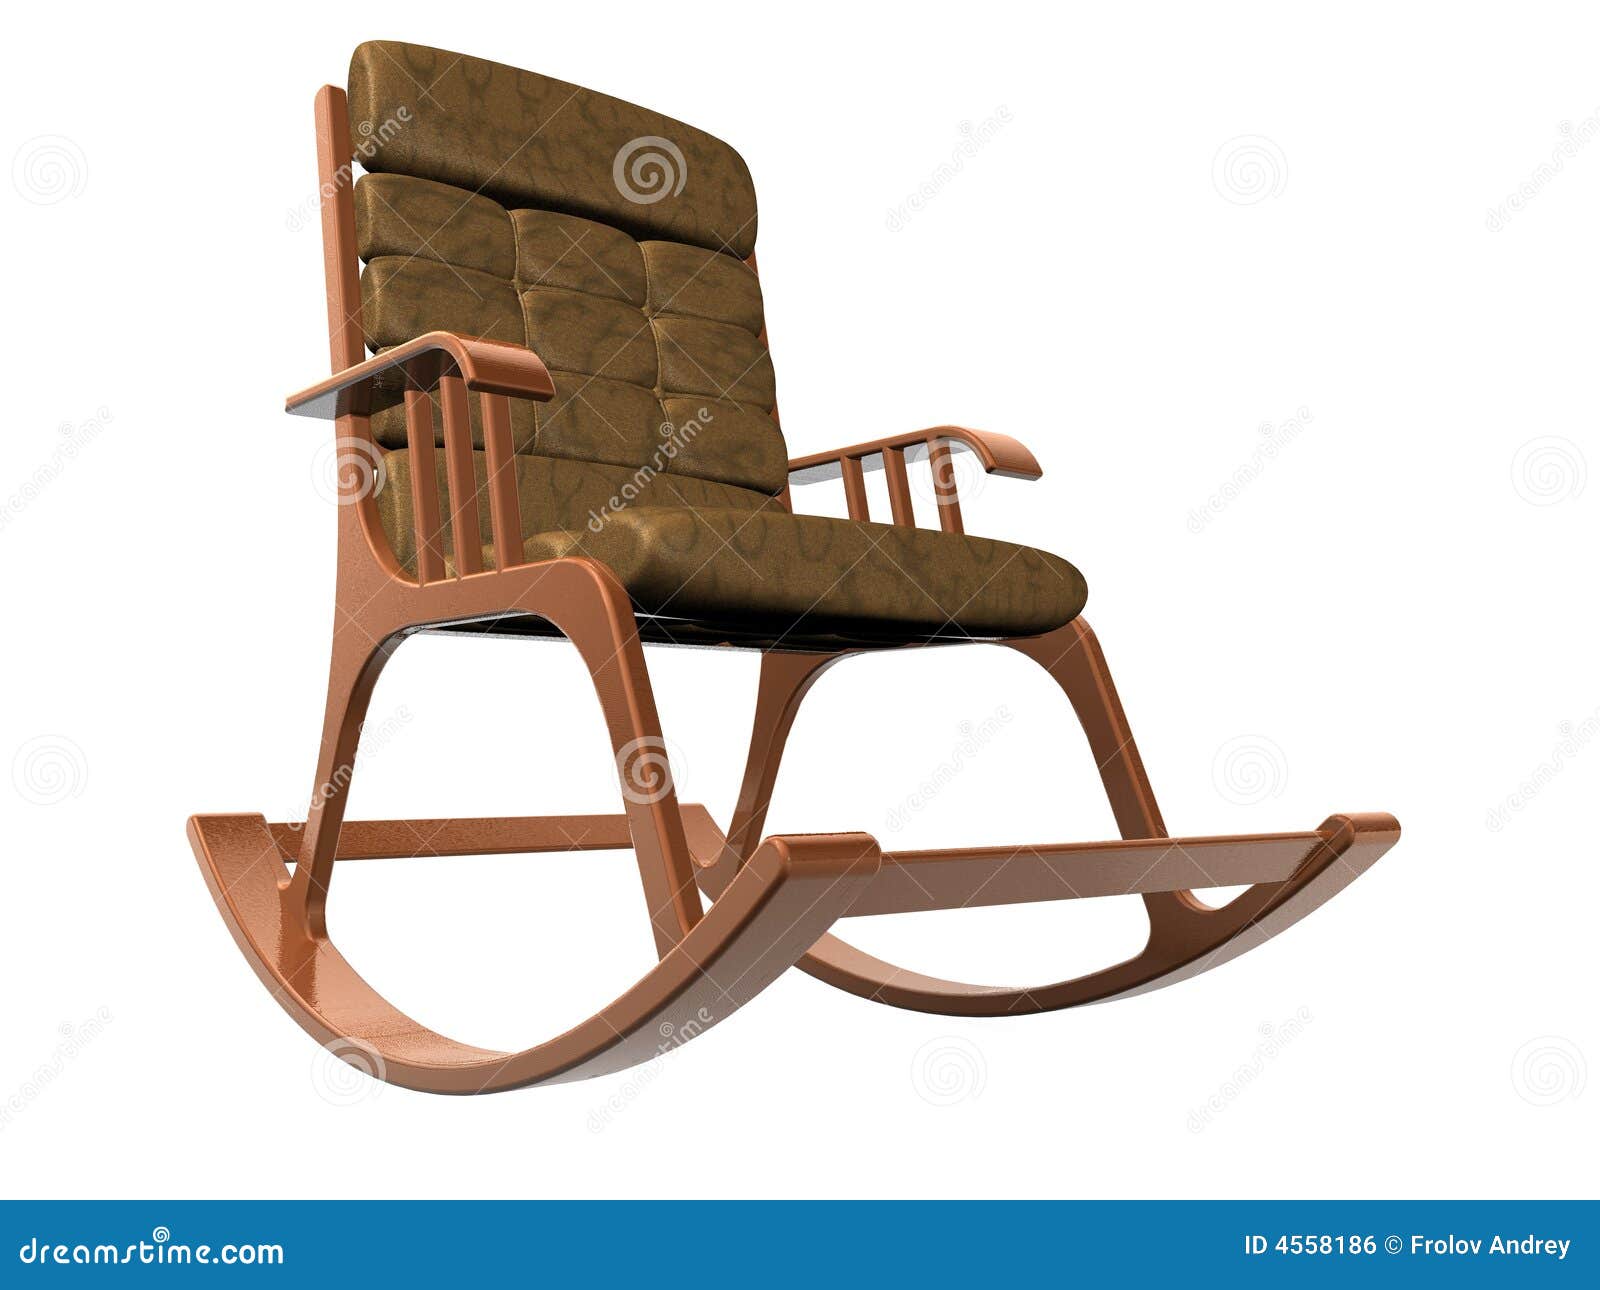 Armchair-rocking Chair Royalty Free Stock Image - Image: 4558186